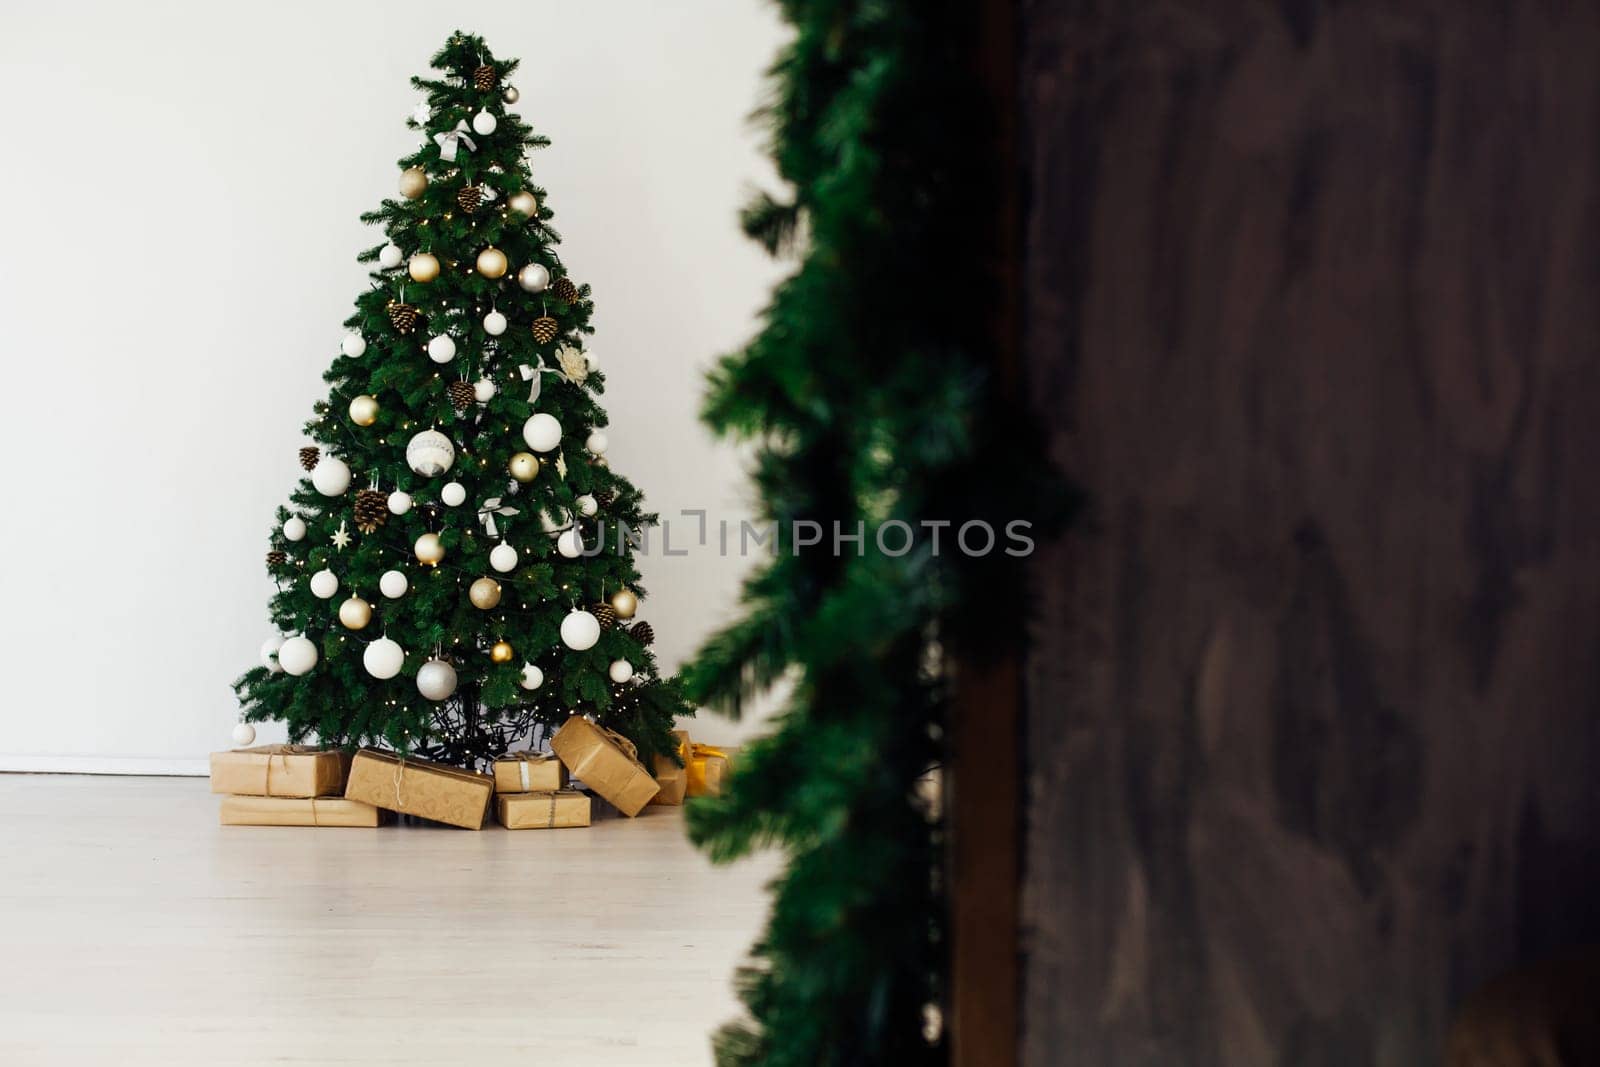 Christmas tree with gifts in the new year decor interior